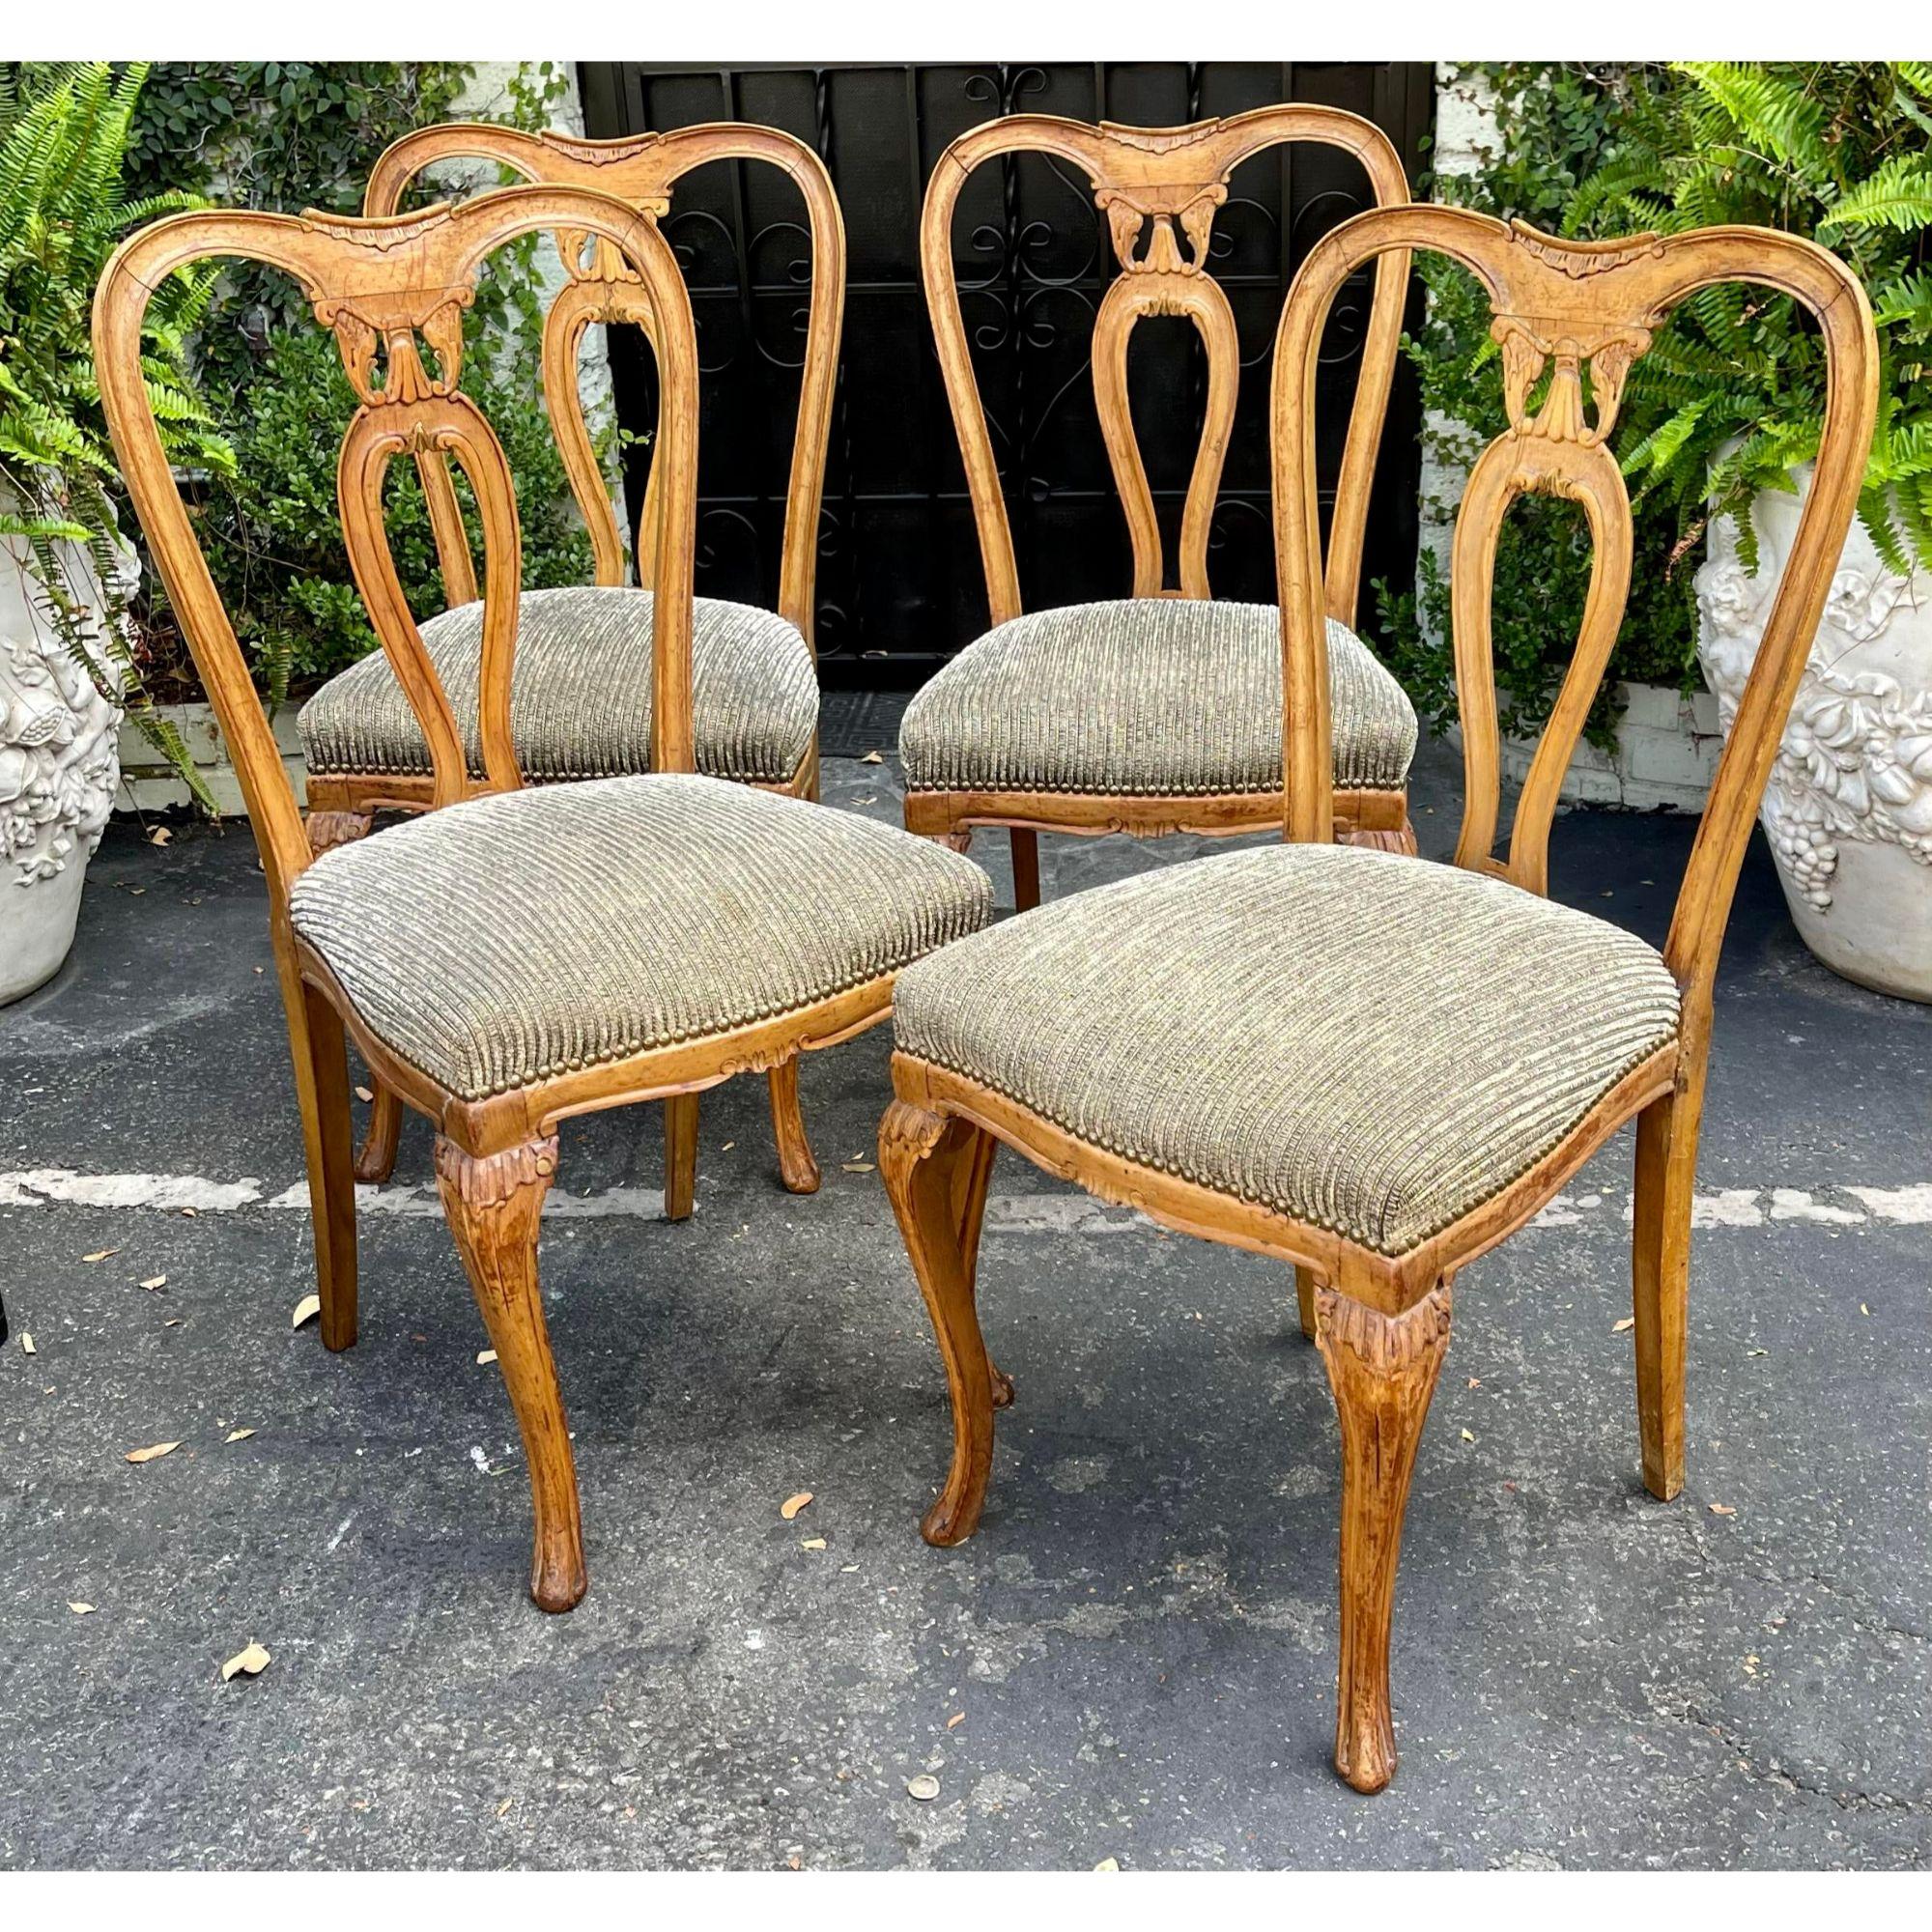 Walnut Set of 4, 19th Century Style Carved Italian Dining Chairs